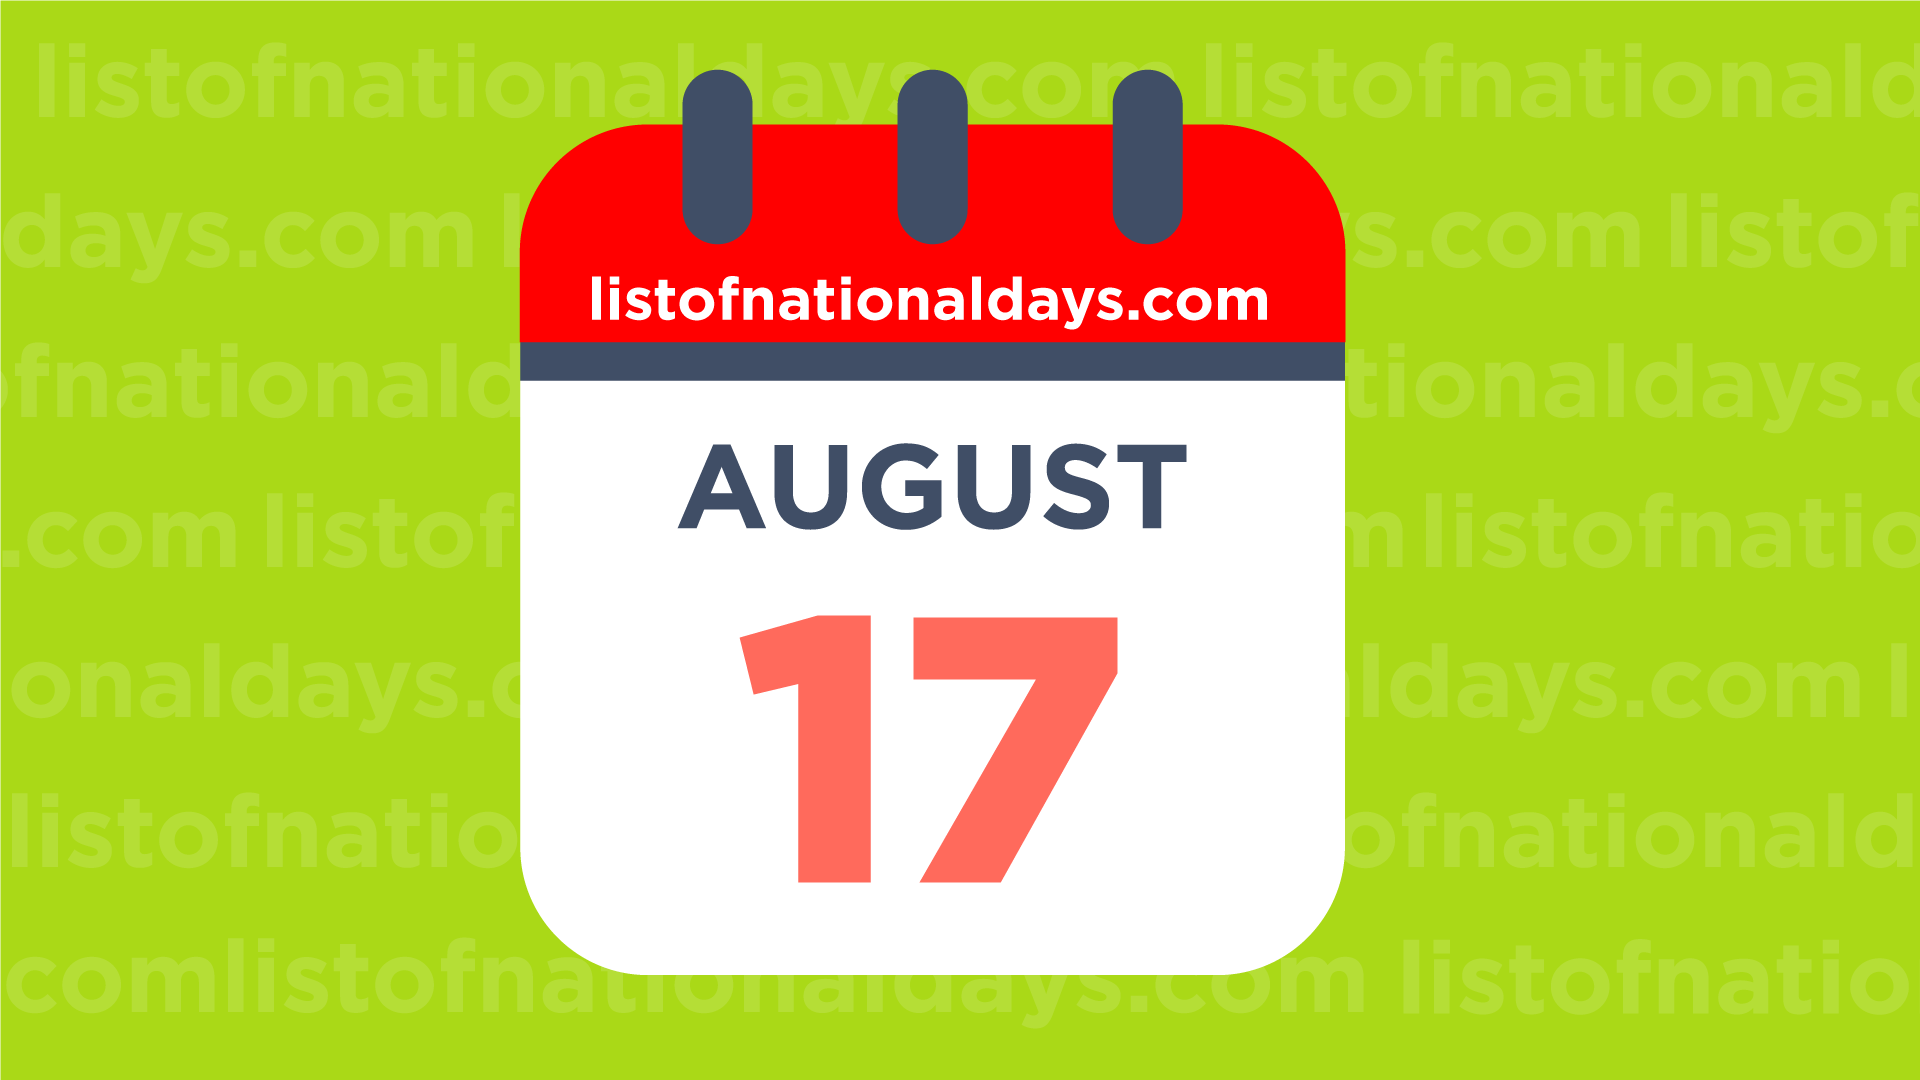 August 17th National Holidays,Observances and Famous Birthdays